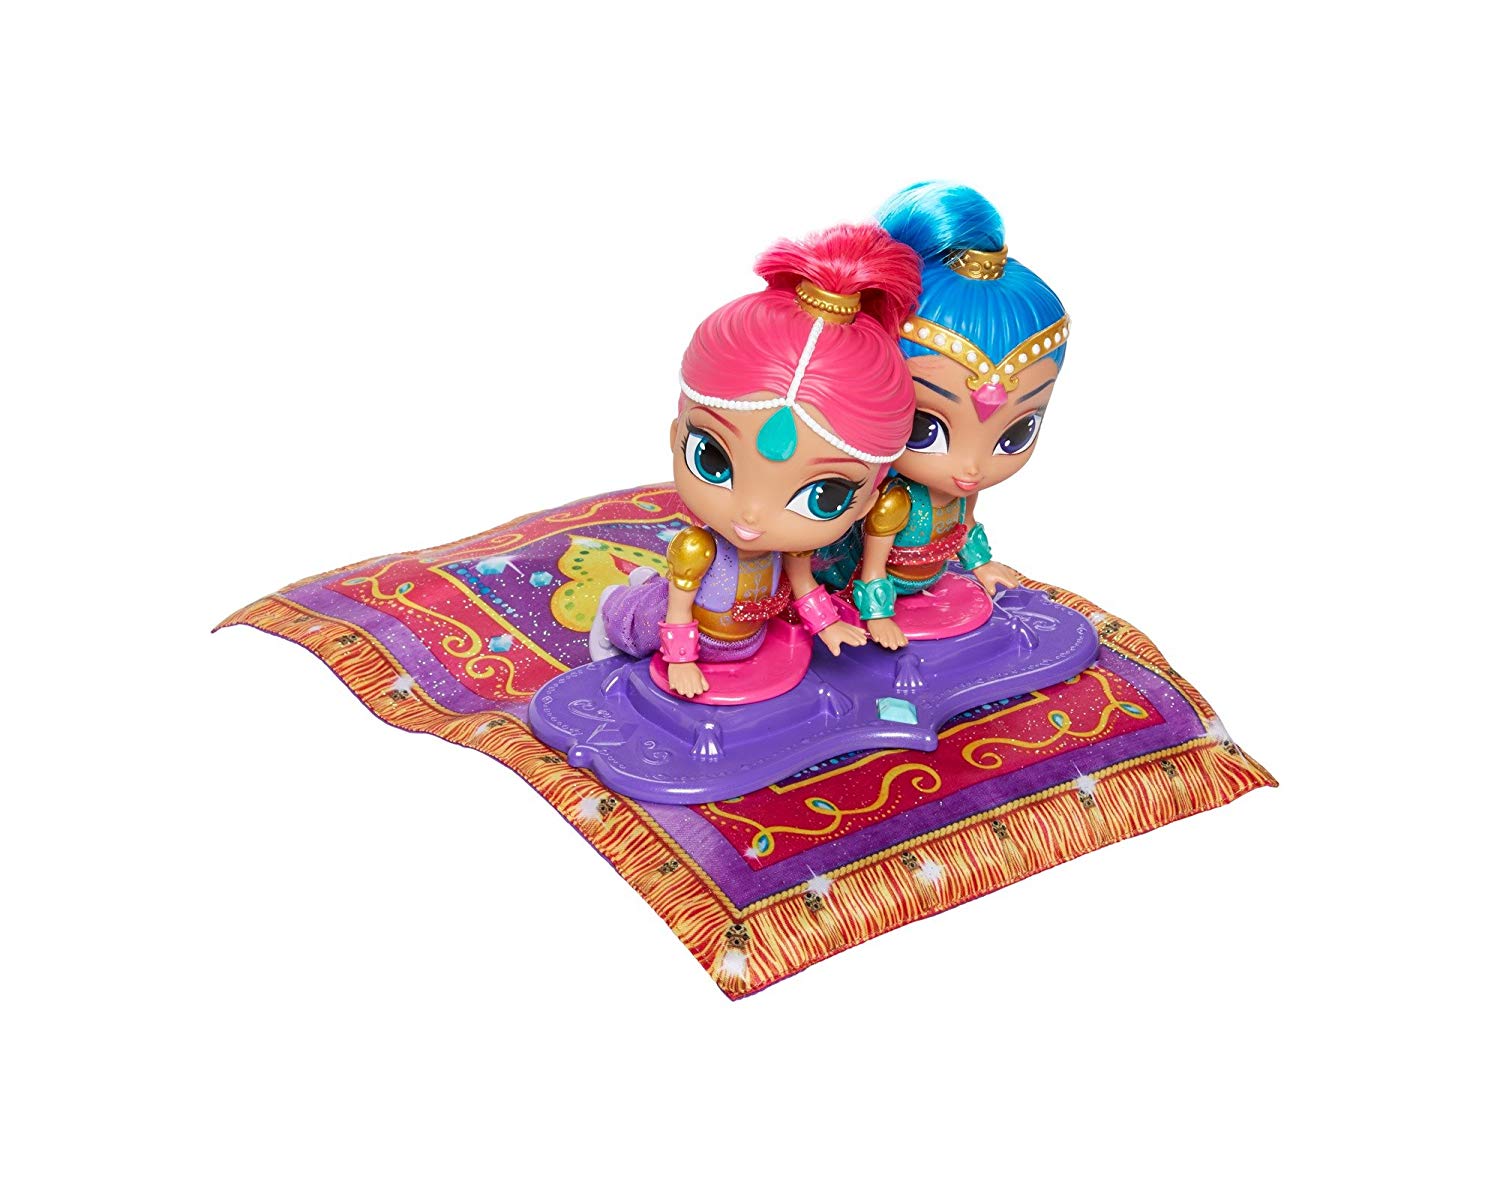 Mattel Gmbh Fhn24 Shimmer & Shine Flying Carpet Playset (With Sound)